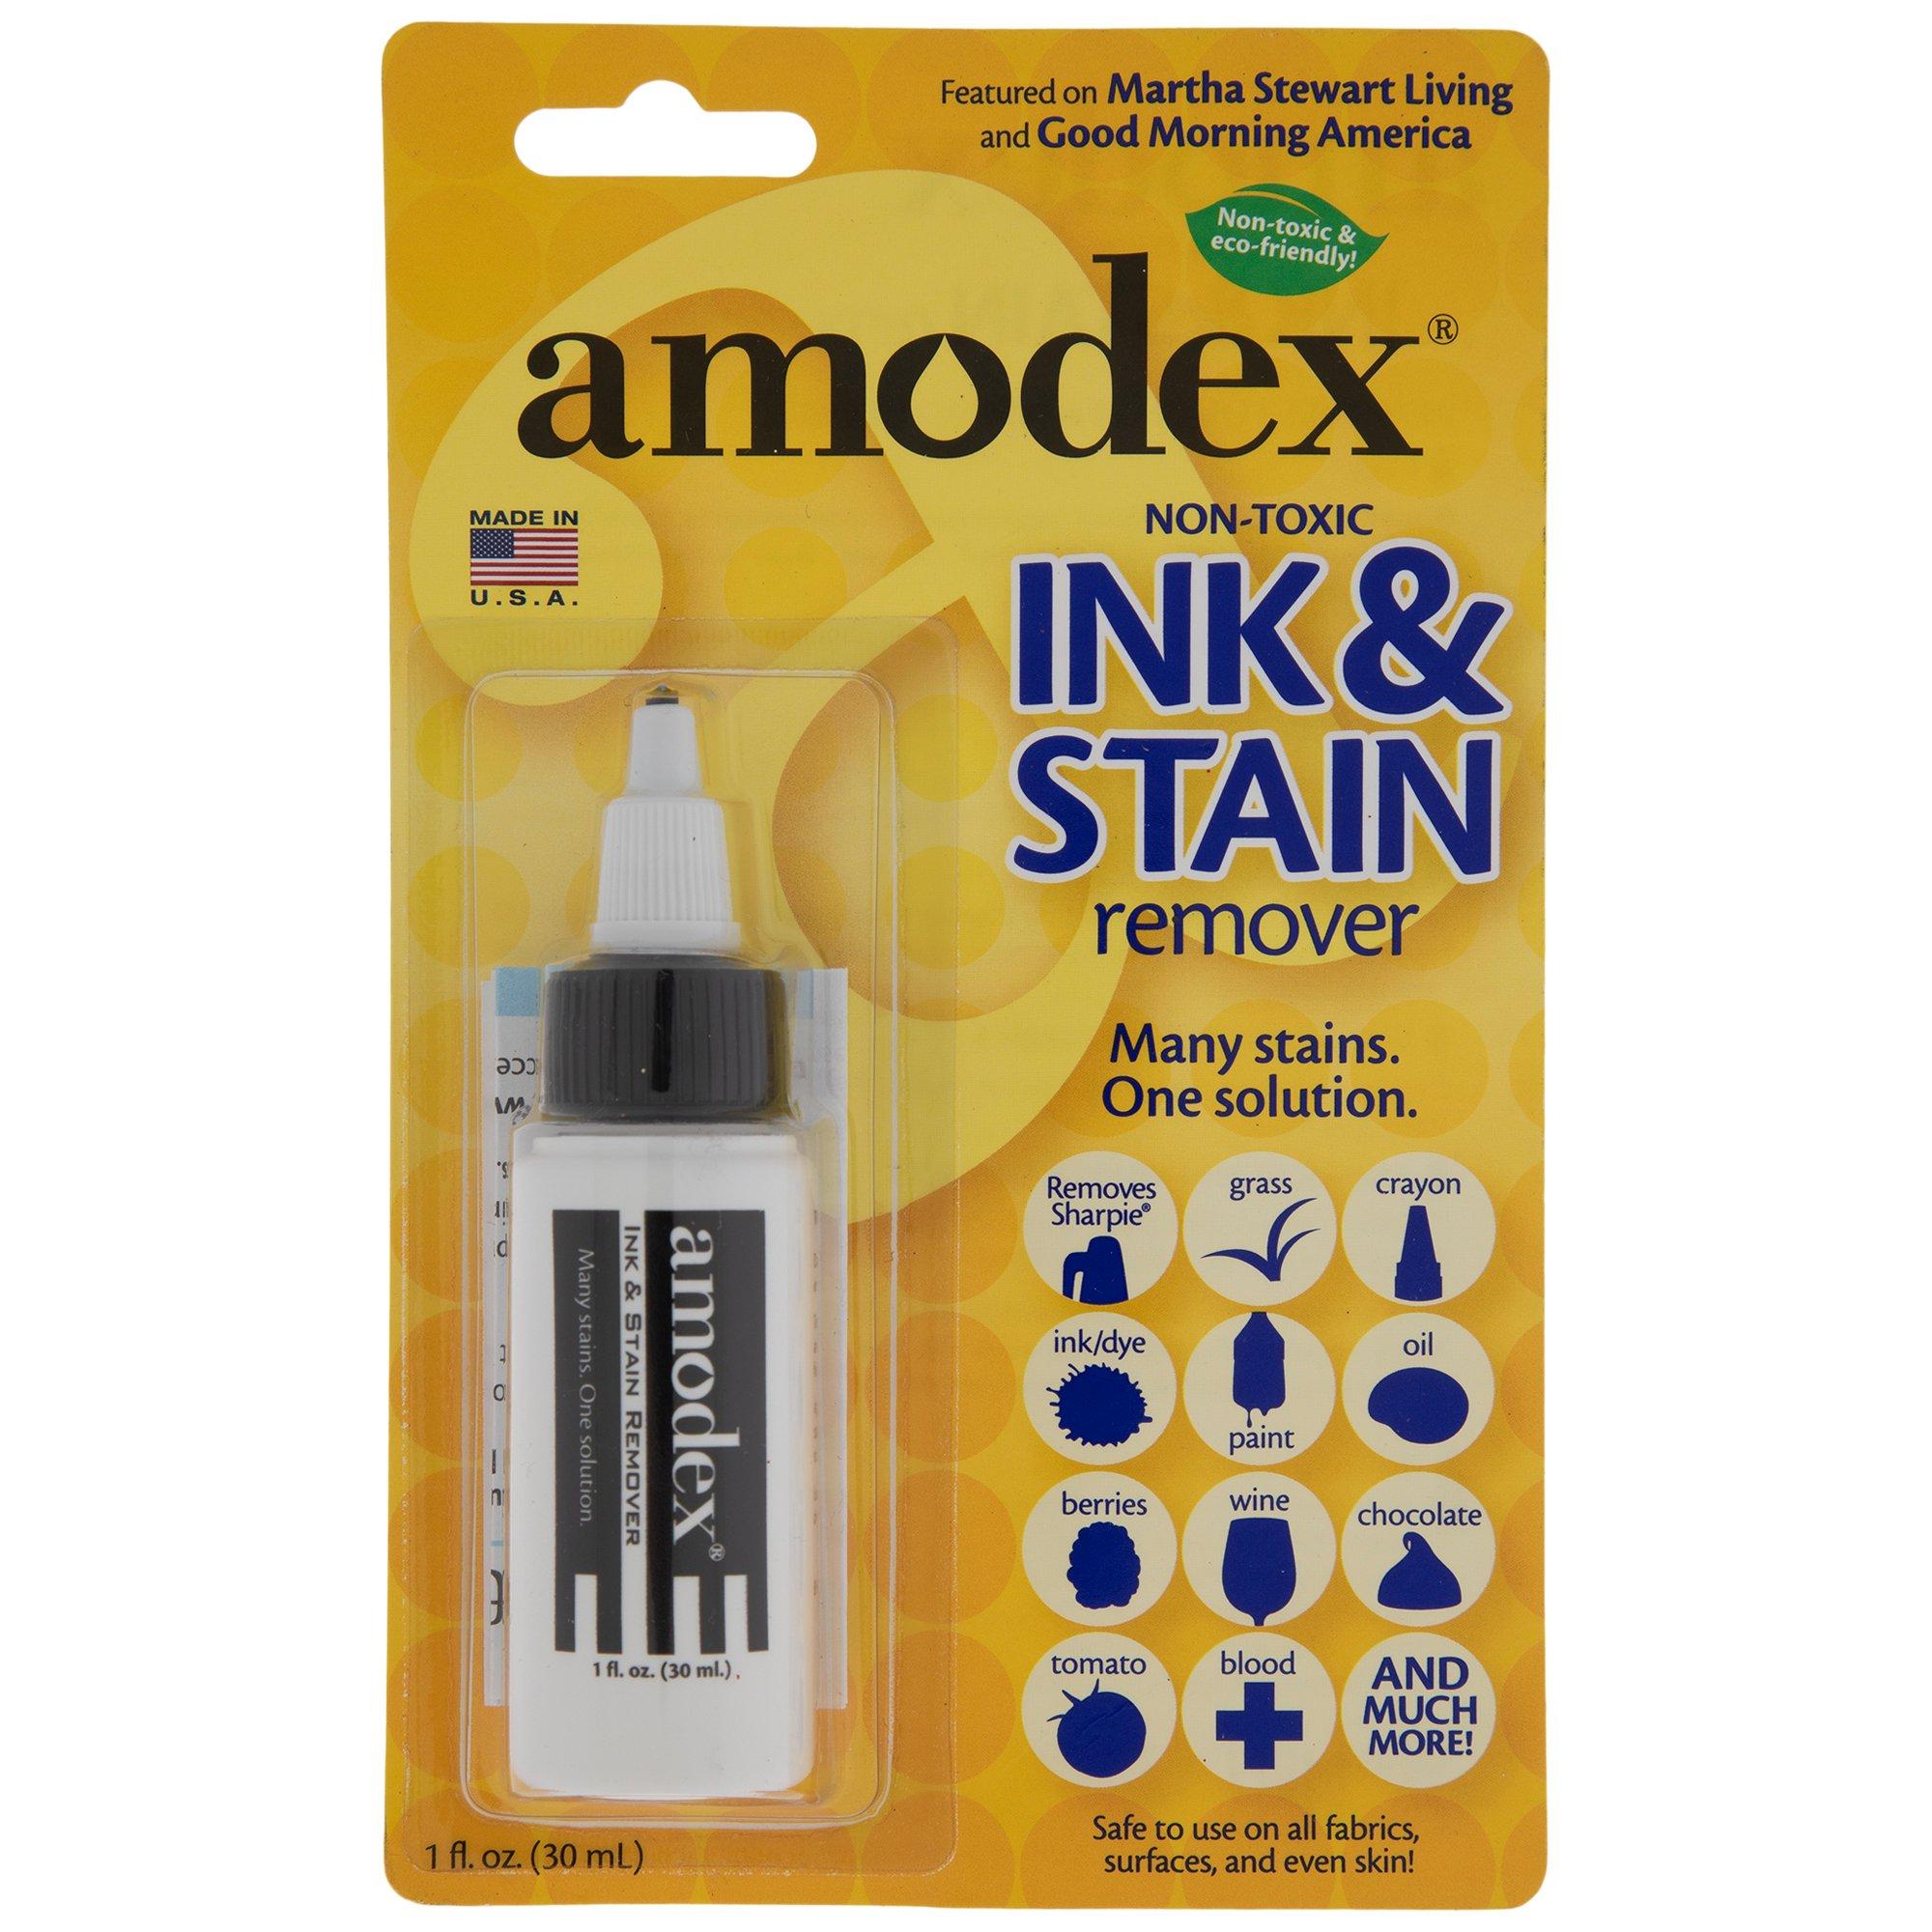 Amodex Ink and Stain Remover – Cleans Marker, Ink, Crayon, Pen, Makeup from  Furniture, Skin, Clothing, Fabric, Leather - Liquid Solution - 4 fl oz